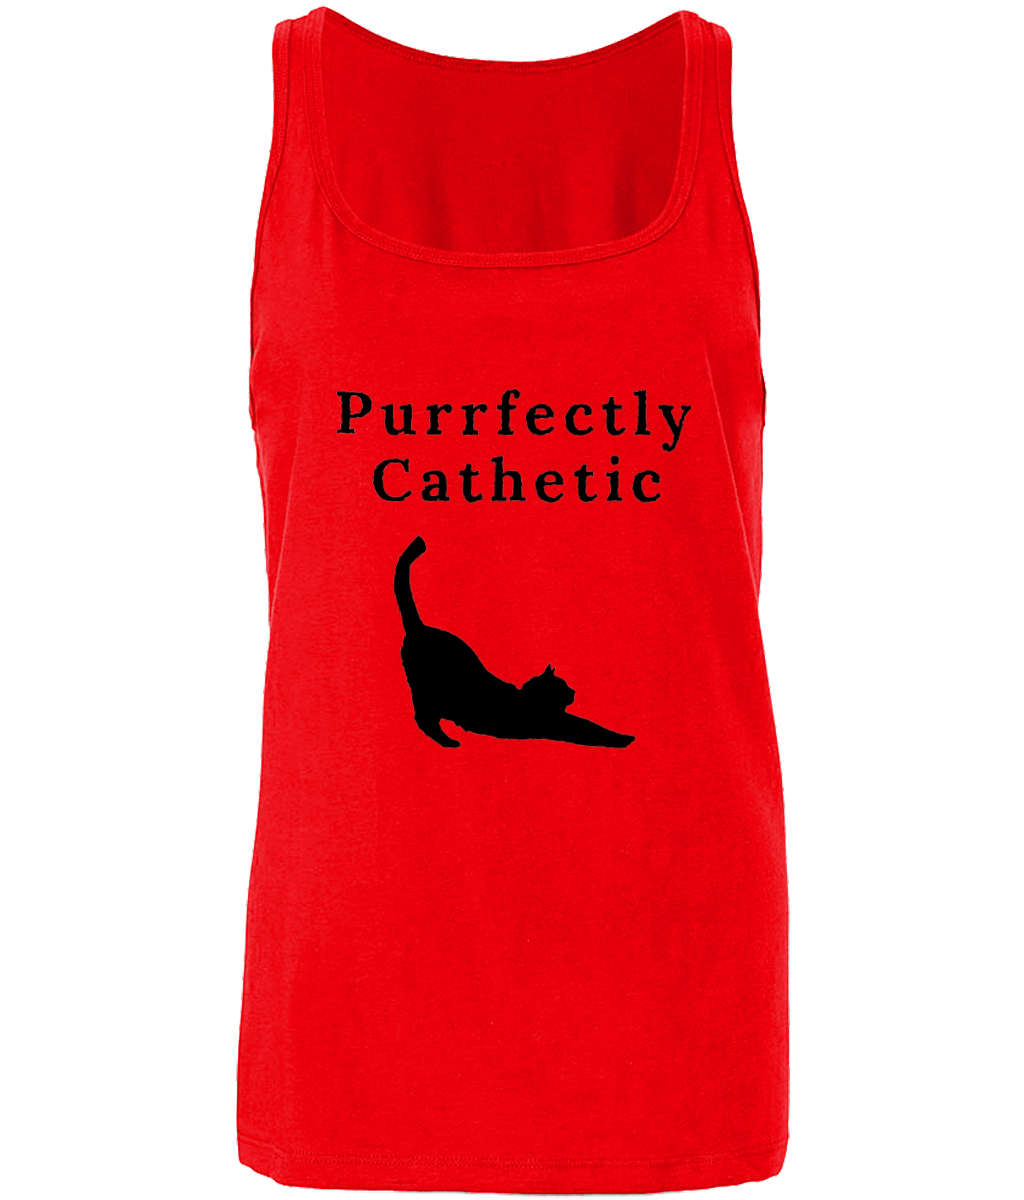 'Purrfectly Cathetic' Tank Top - squishbeans